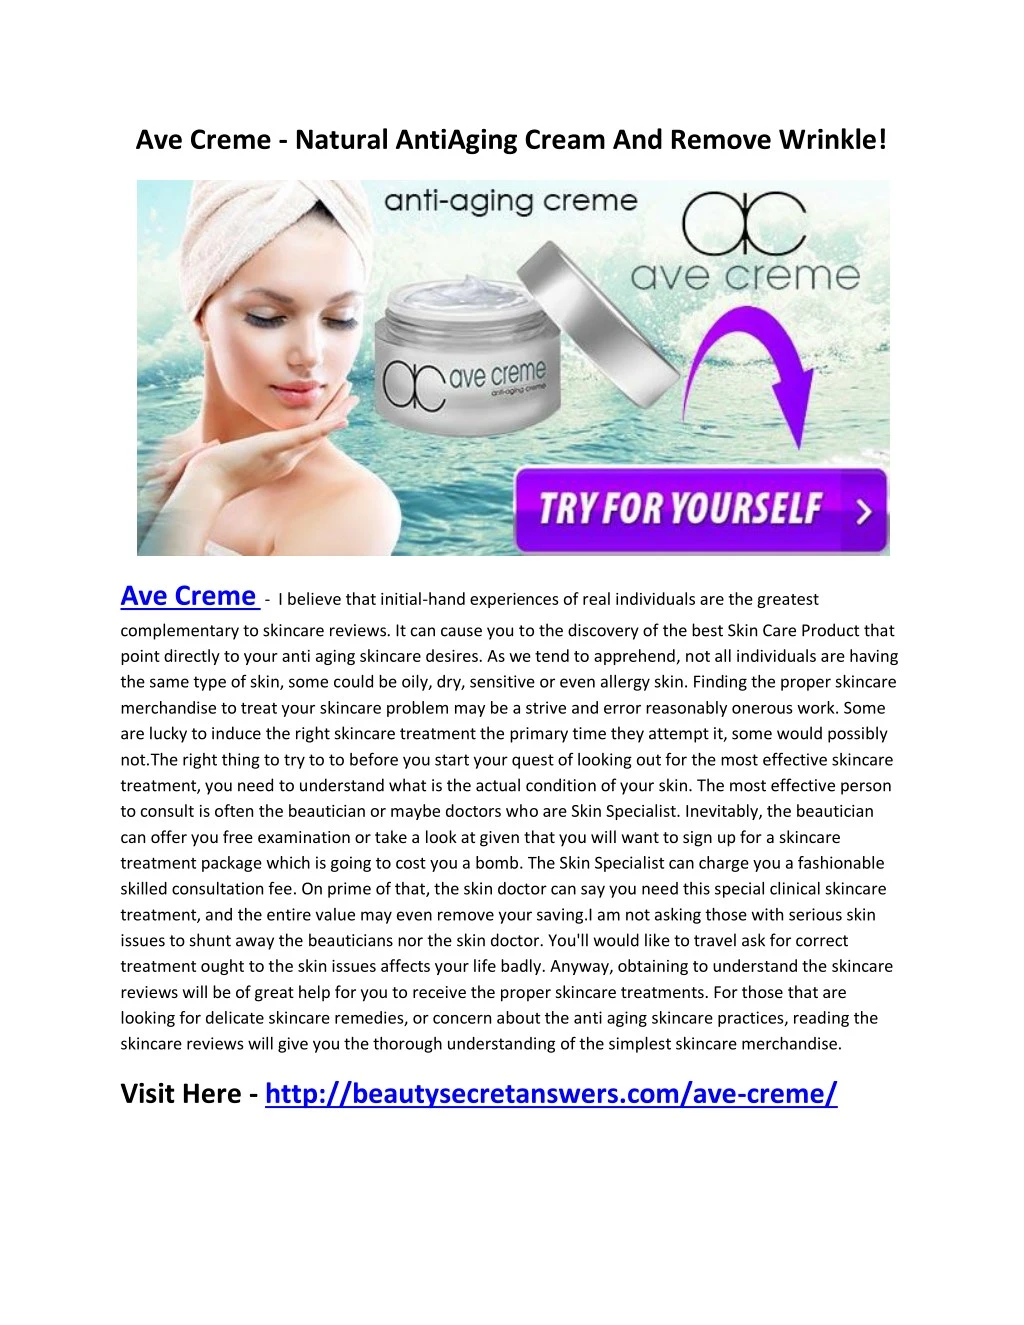 ave creme natural antiaging cream and remove